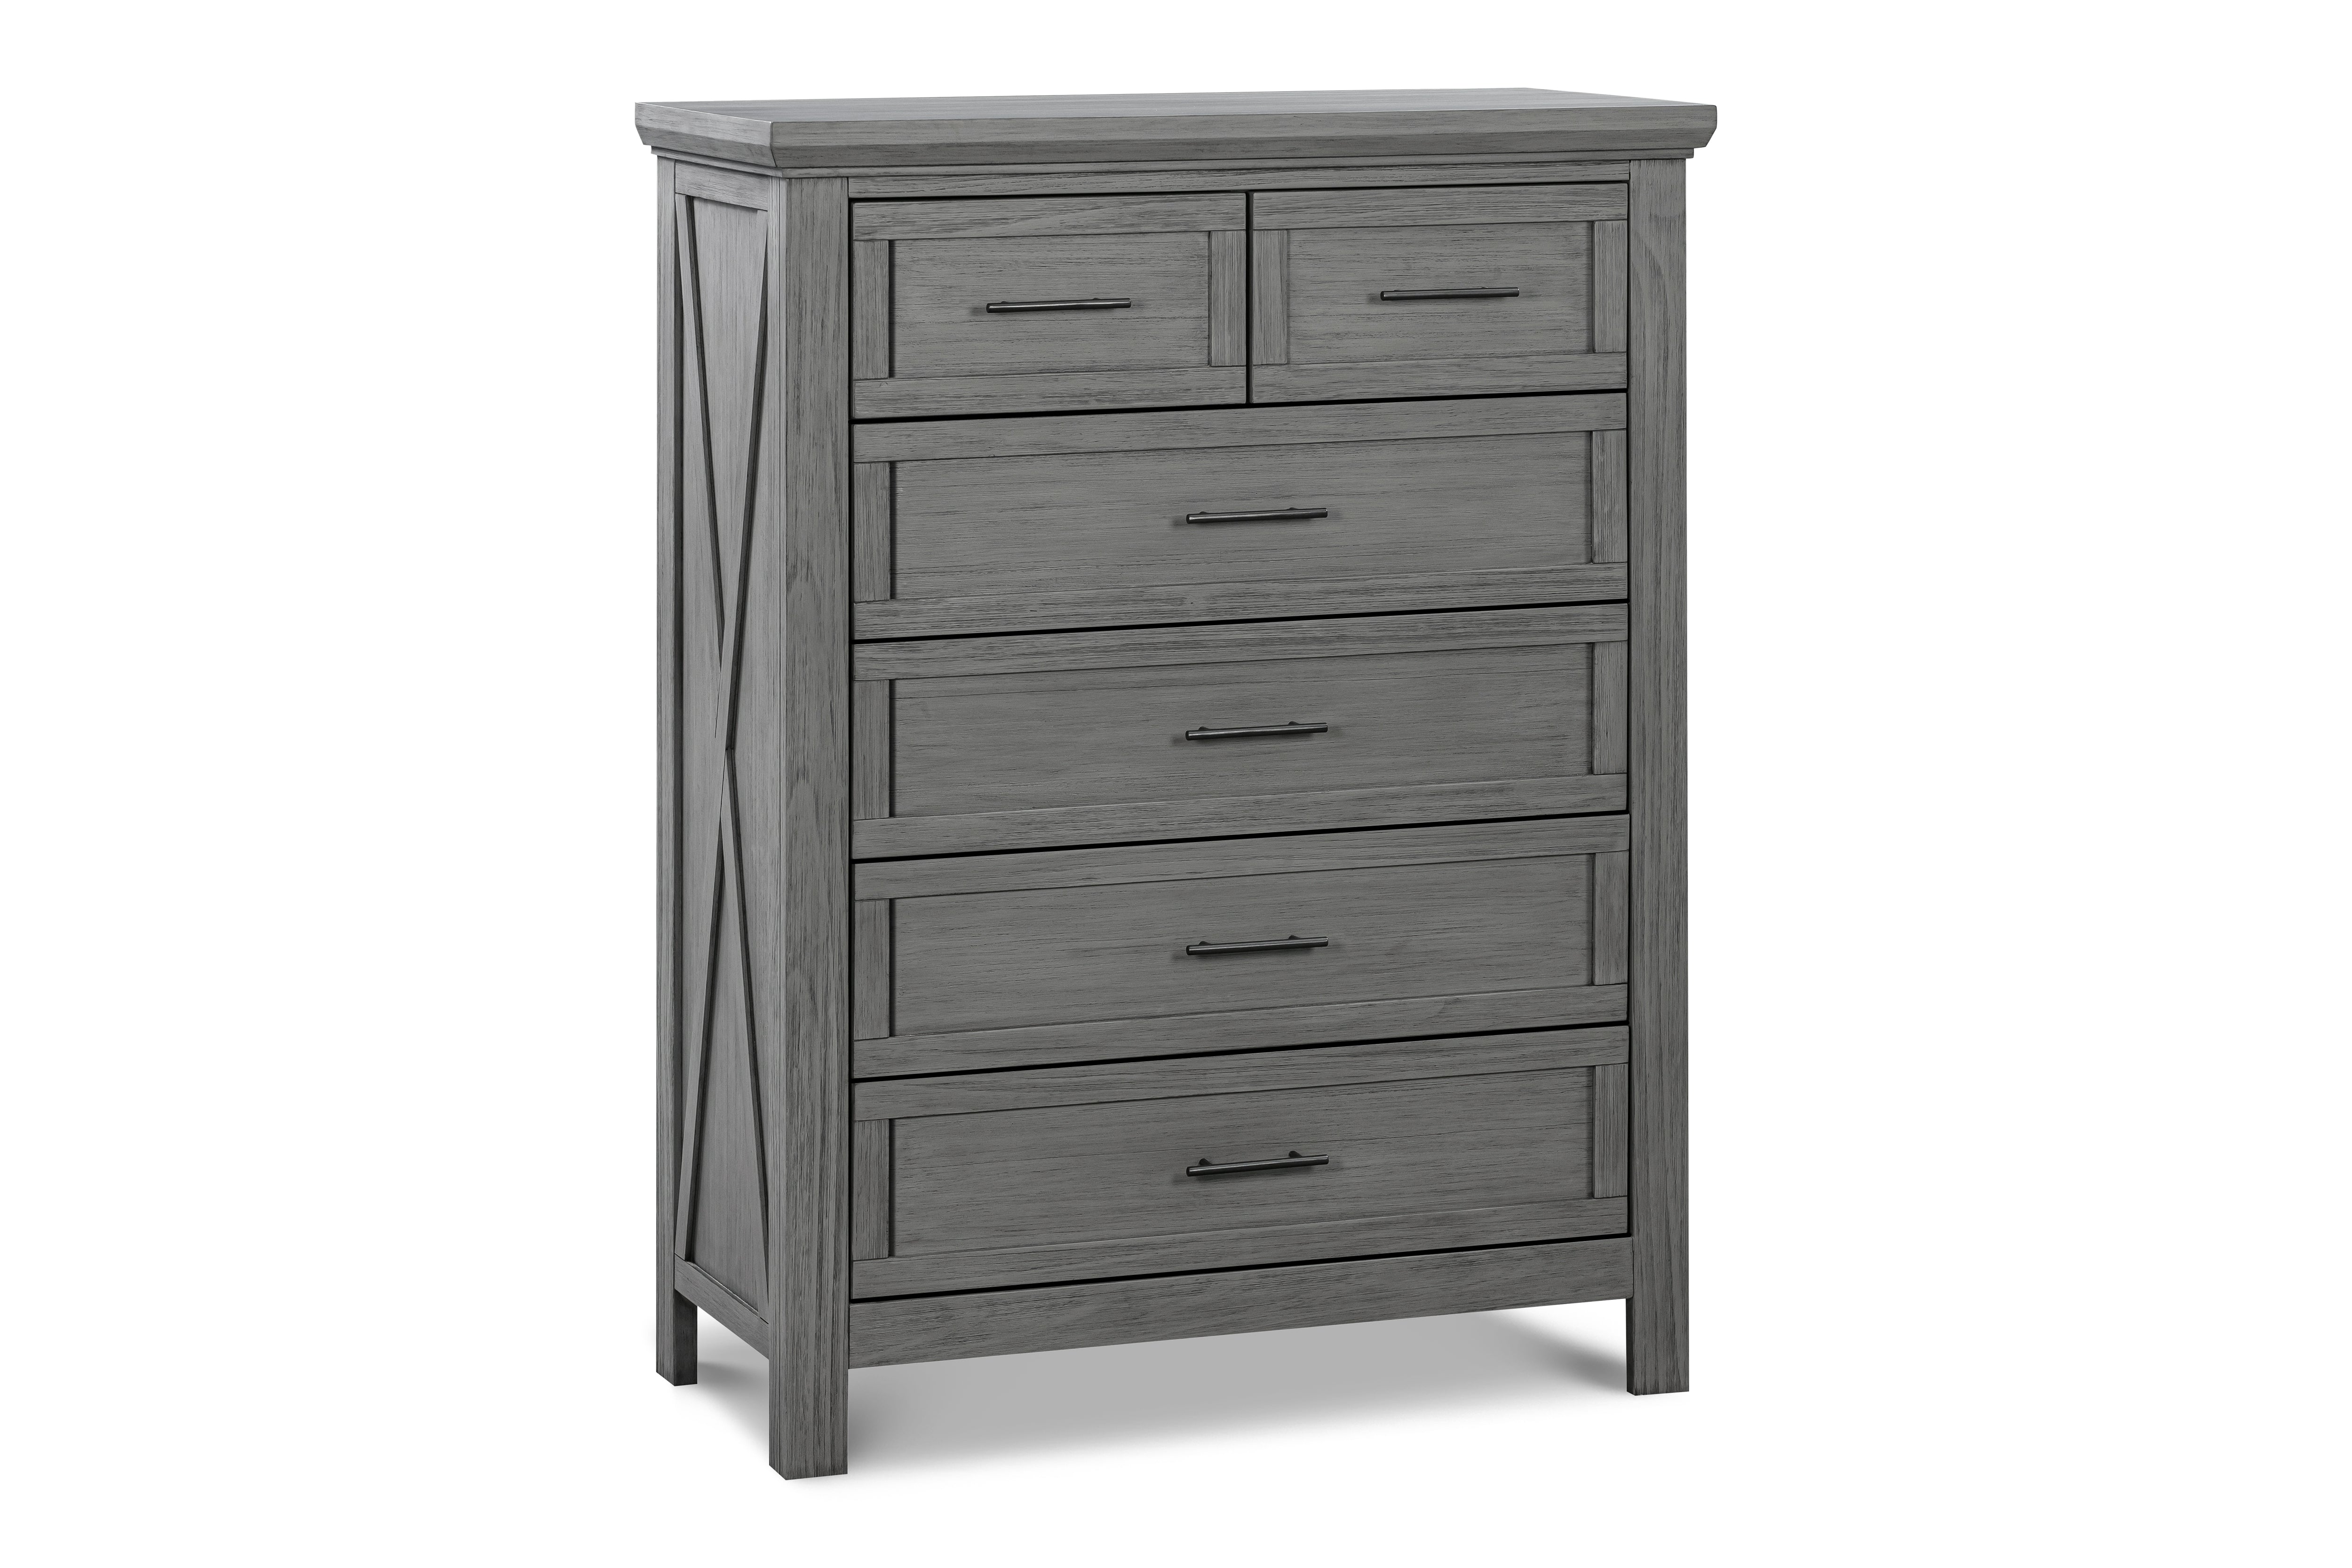 Emory chest in weathered charcoal 